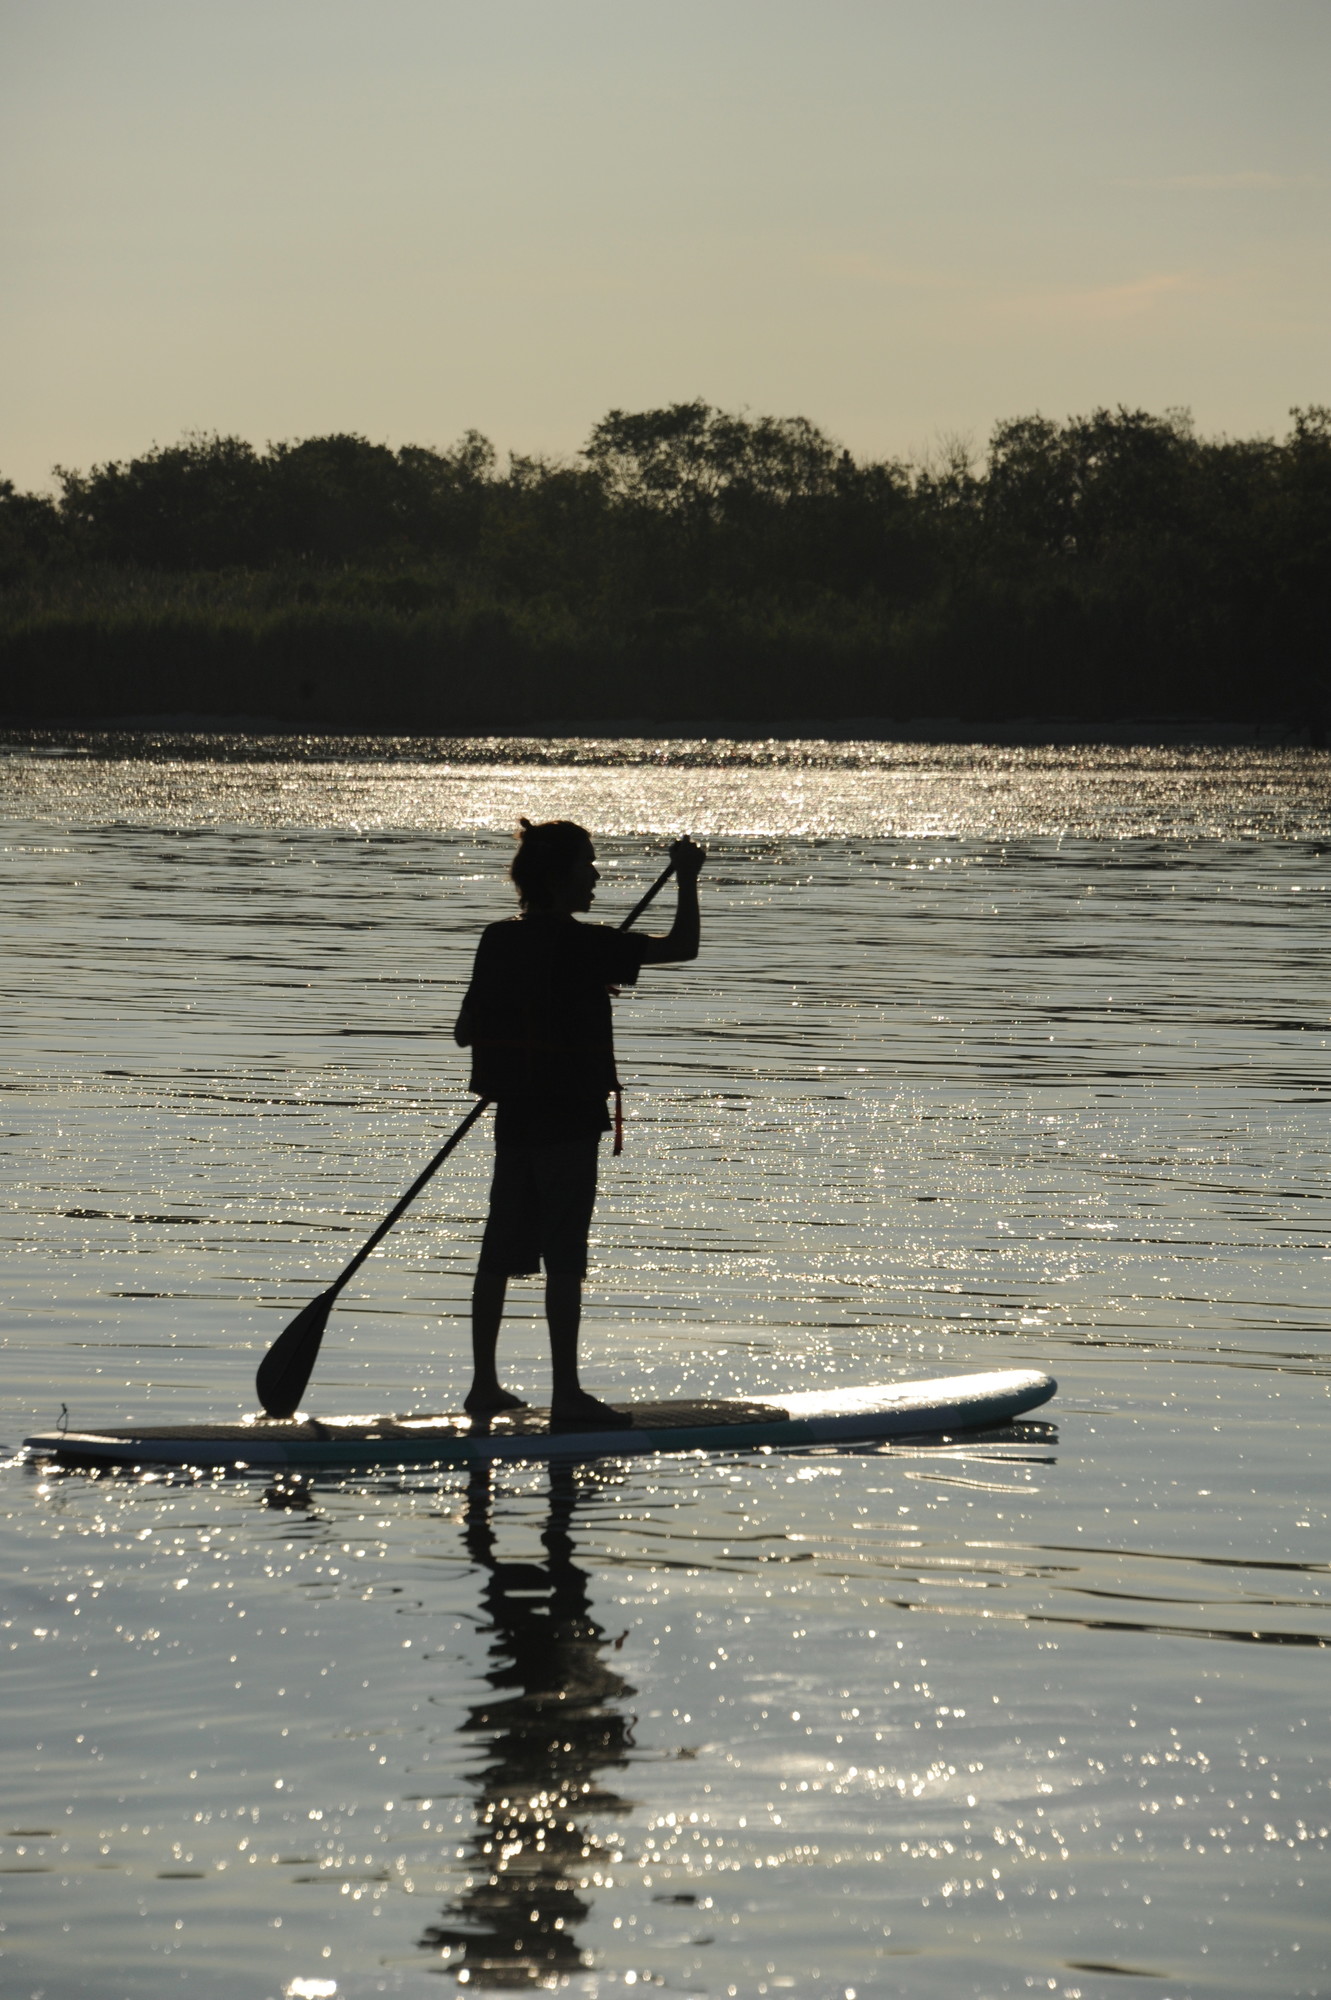 Paddle boarding, Pane said, was among "the most tranquil moments I’ve ever had on Long Island."